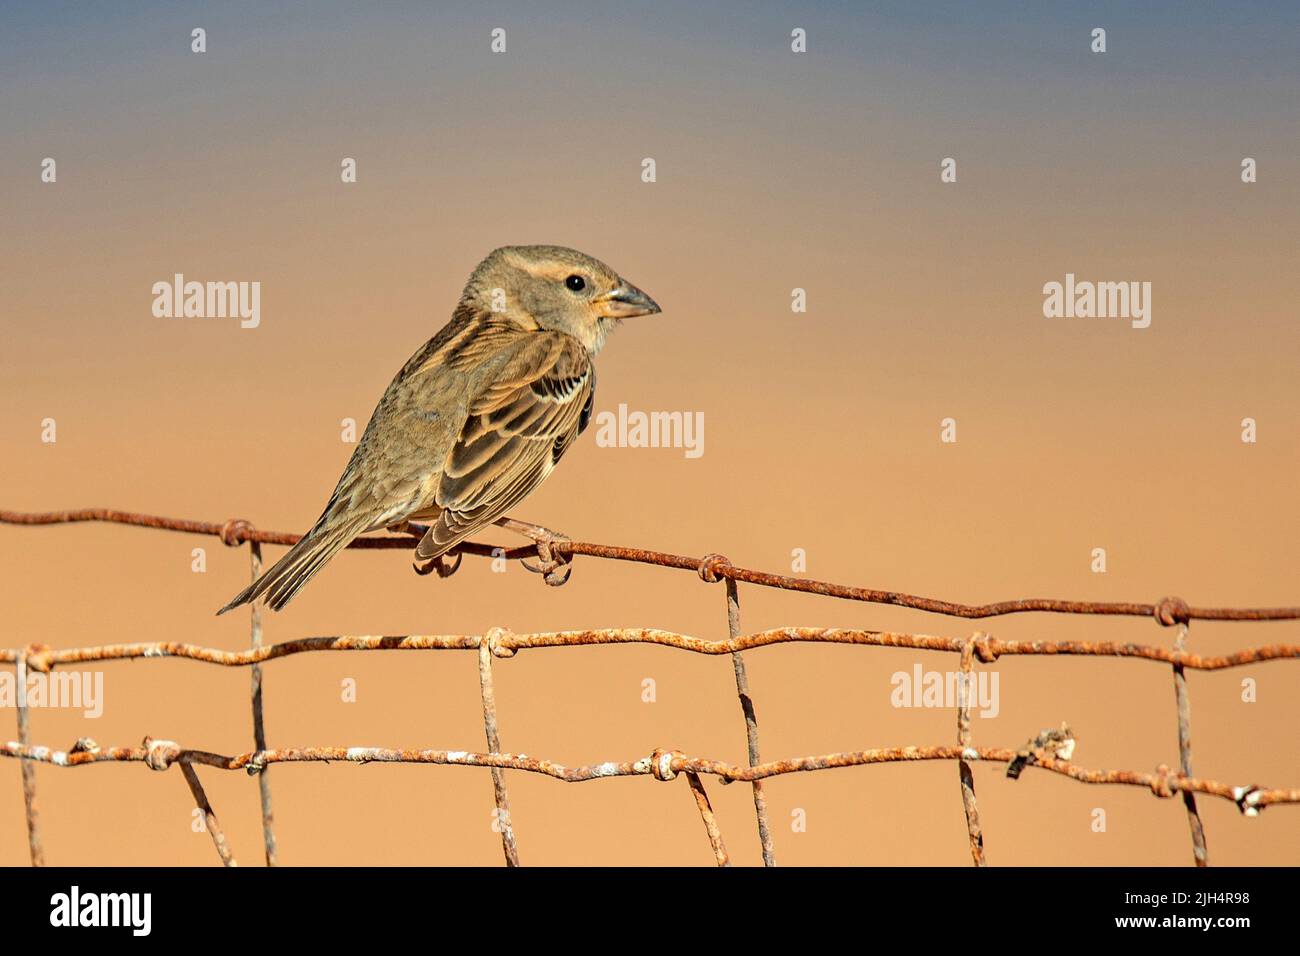 Spanish sparrow, willow sparrow (Passer hispaniolensis), female perching on a rusty mesh wire fence, side view, Canary Islands, Fuerteventura Stock Photo